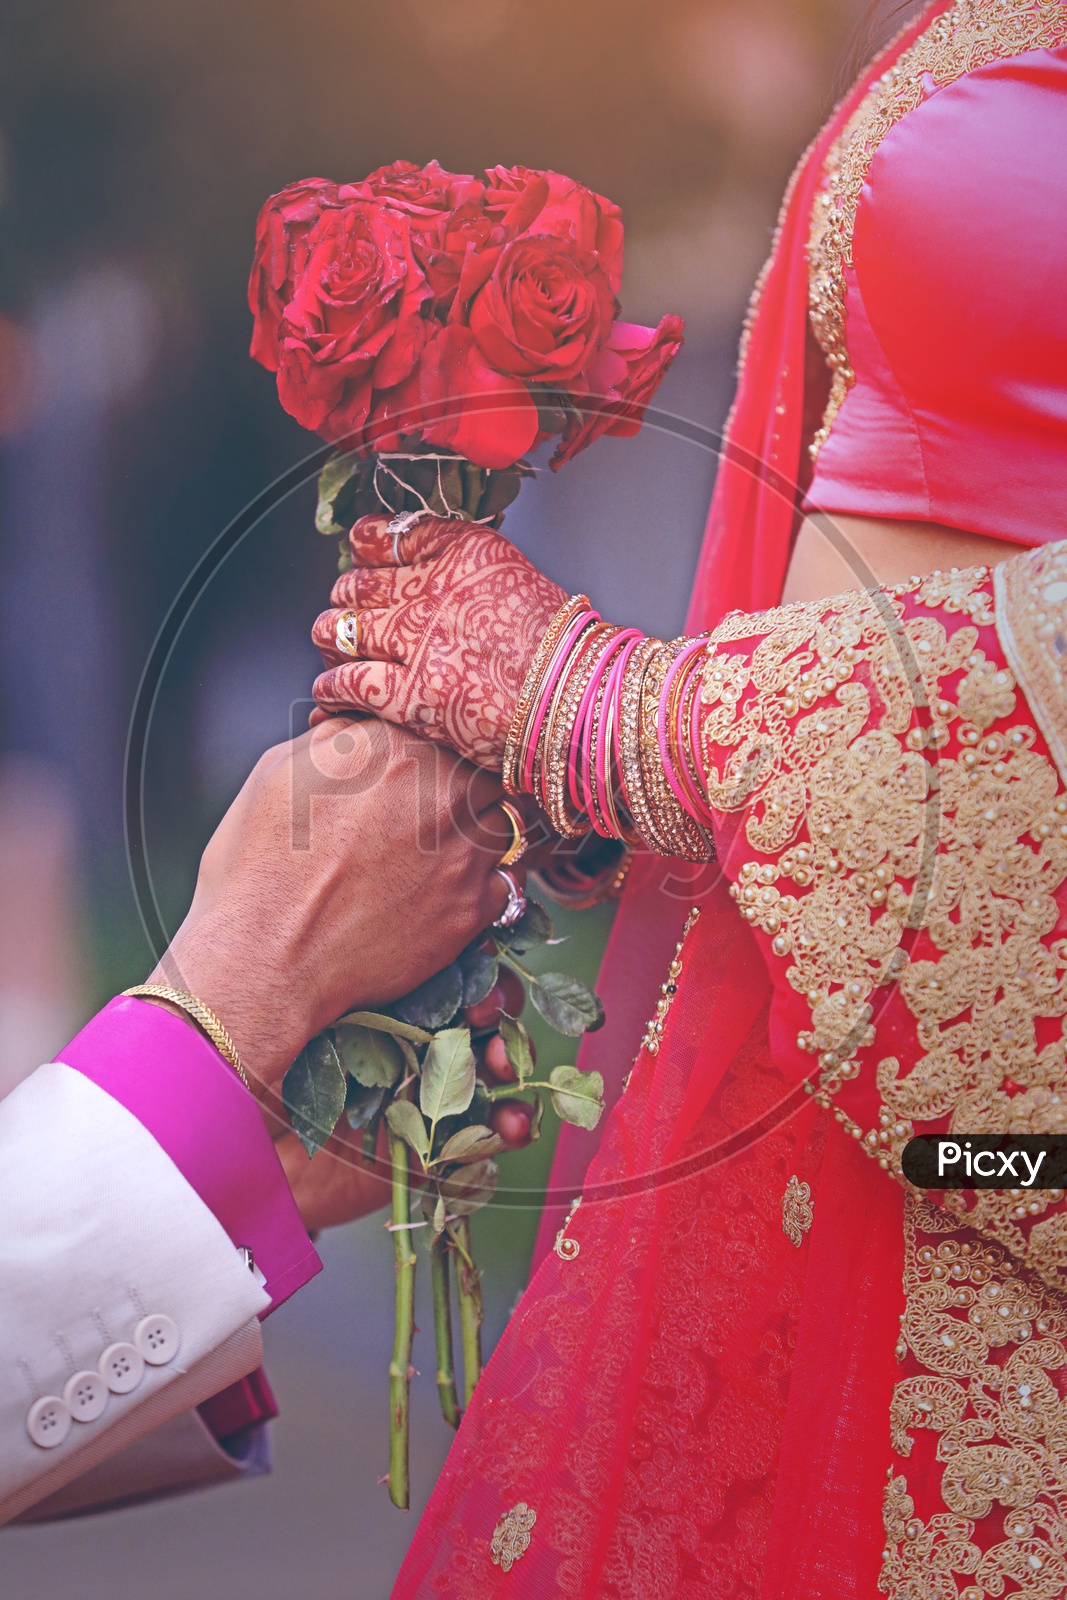 Groom Giving Bride a  Red Roses Bouquet  with Love and in a Romantic Way For Being Together in a Wedding Ceremony